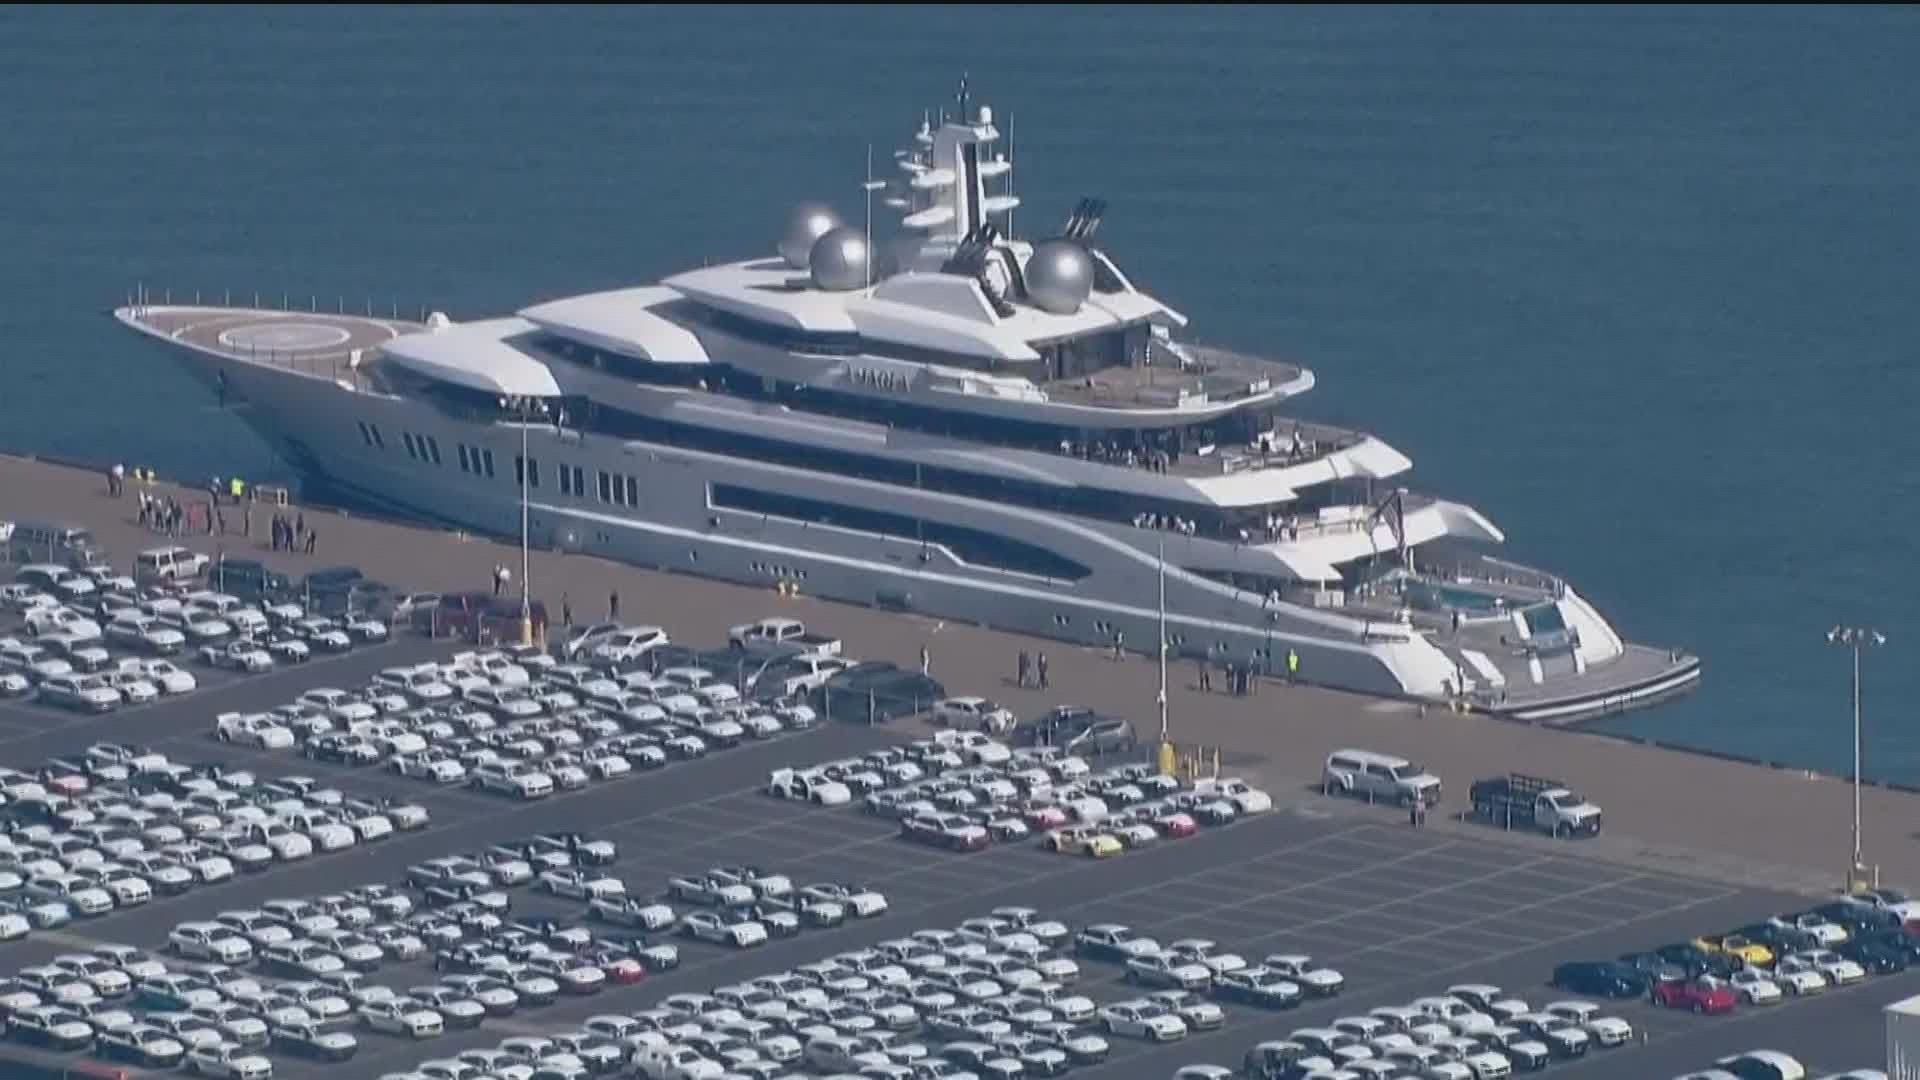 The Department of Justice seized the super yacht in May in an effort to put pressure on Russia over the war in Ukraine.